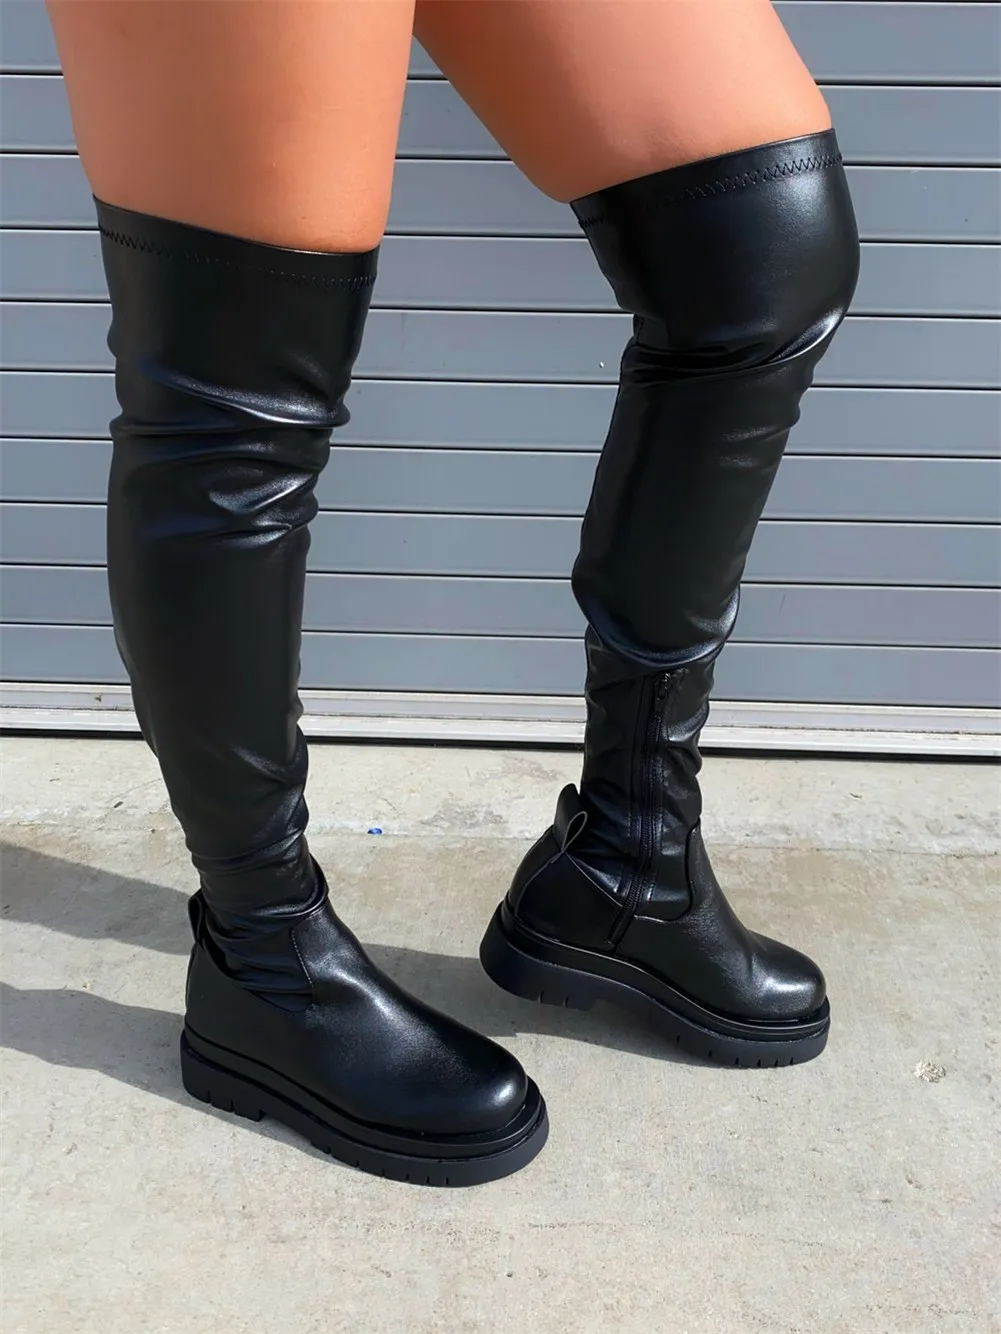 

Lasyarrow Brand New Female Platform Thigh High Boots Fashion Slim Chunky Heels Over The Knee Boots Women Party Shoes Woman